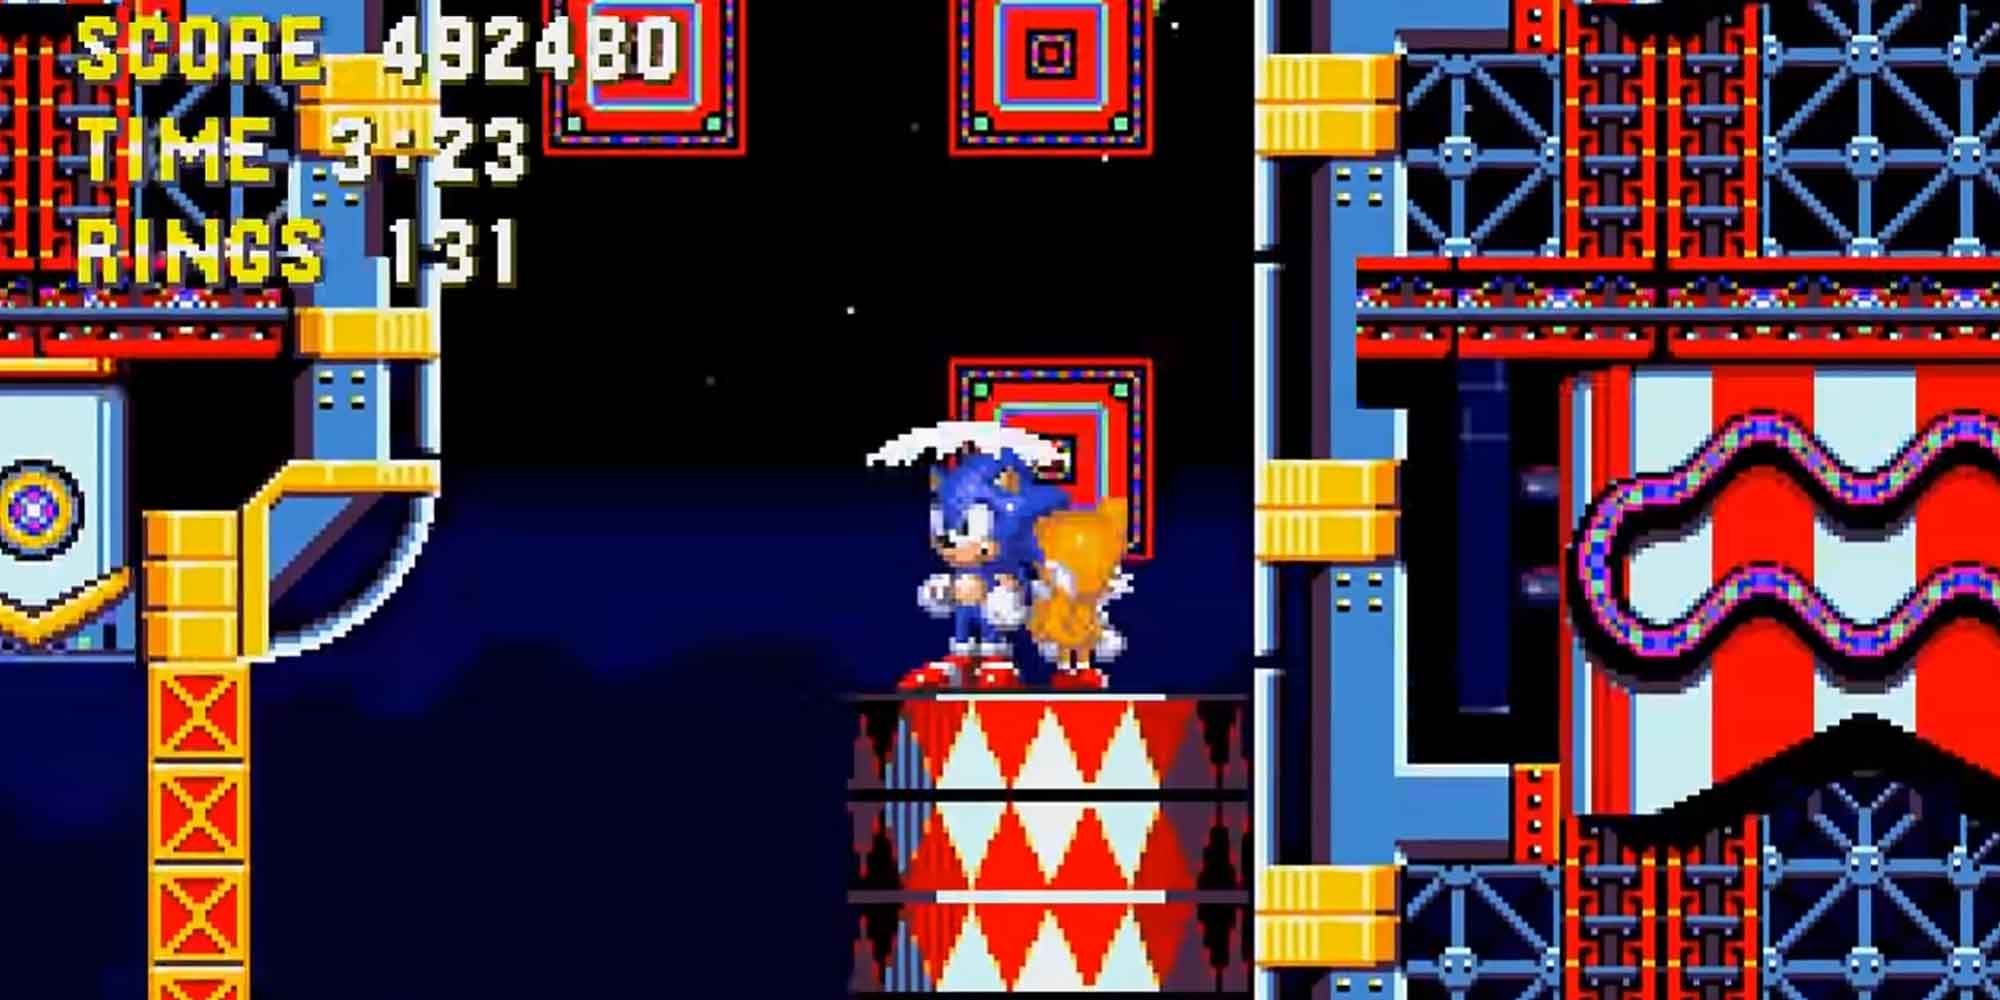 The Carnival Night level in Sonic 3.